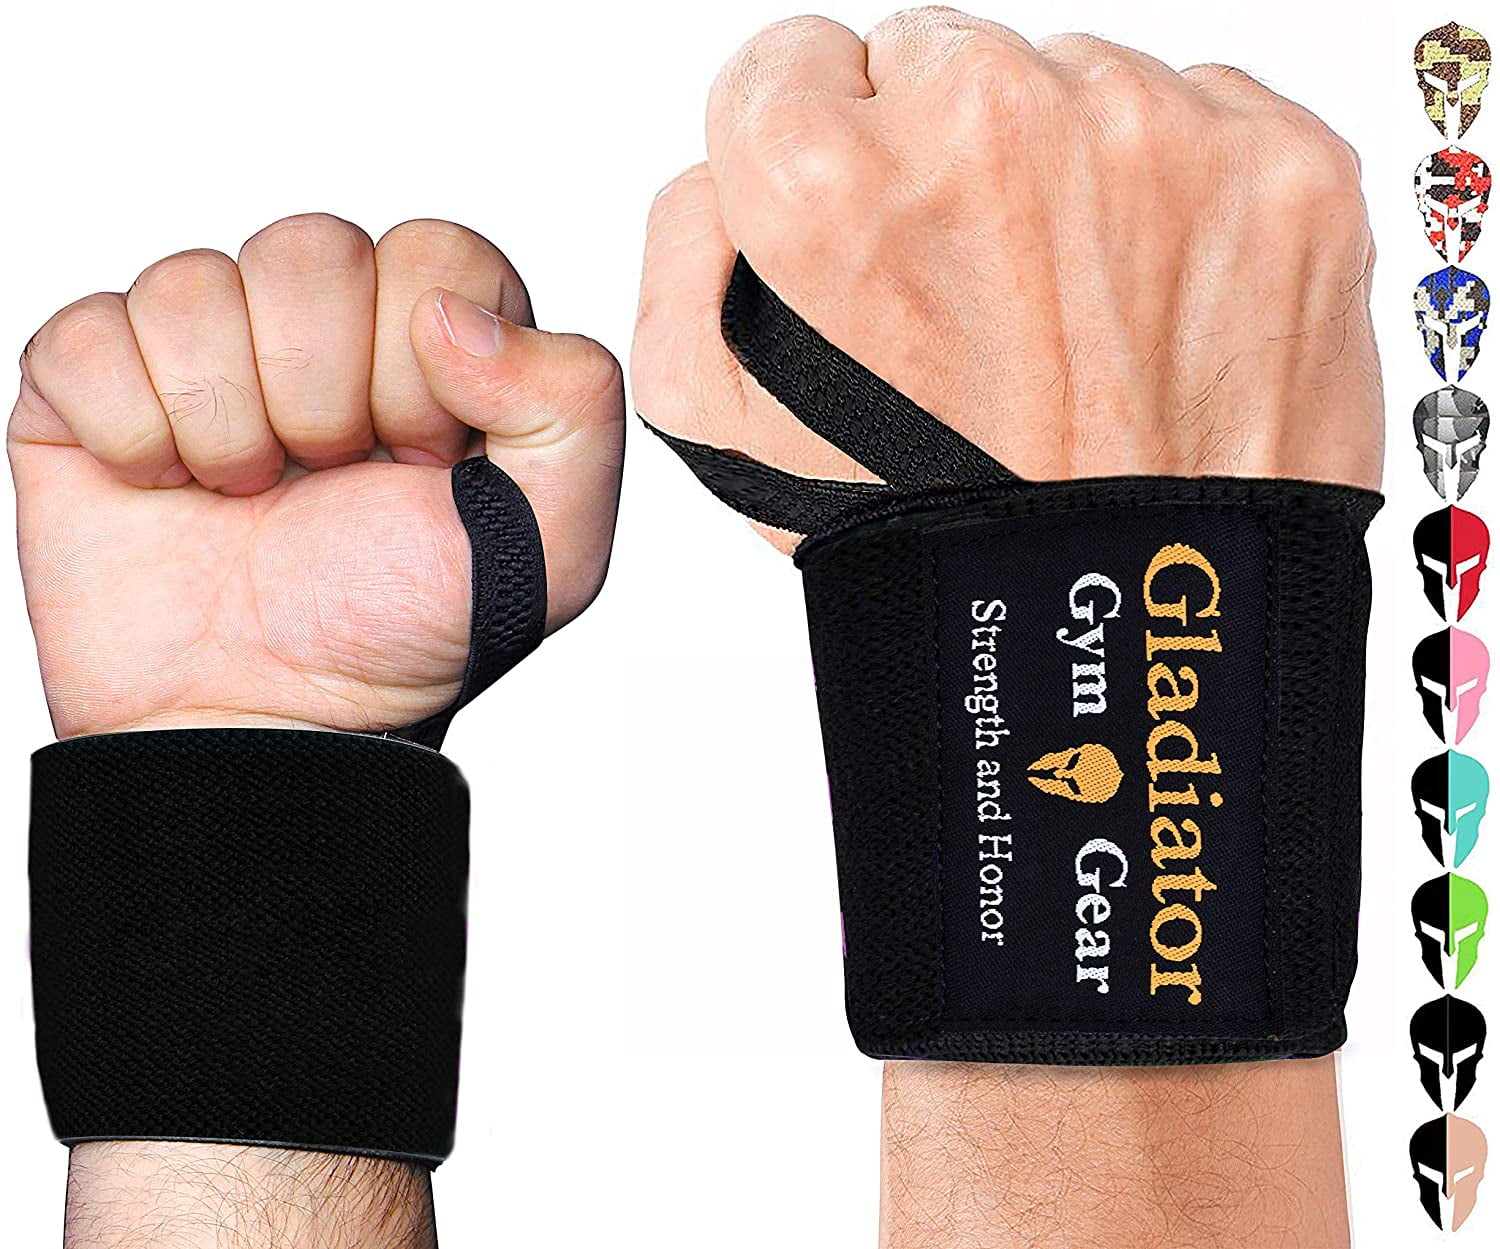 Workout and Exercise Bodybuilding Gymnastics Elasticated Straps for Strength Training Powerlifting Leather Opening Weight Lifting Wrist Support Wraps with Thumb Loop